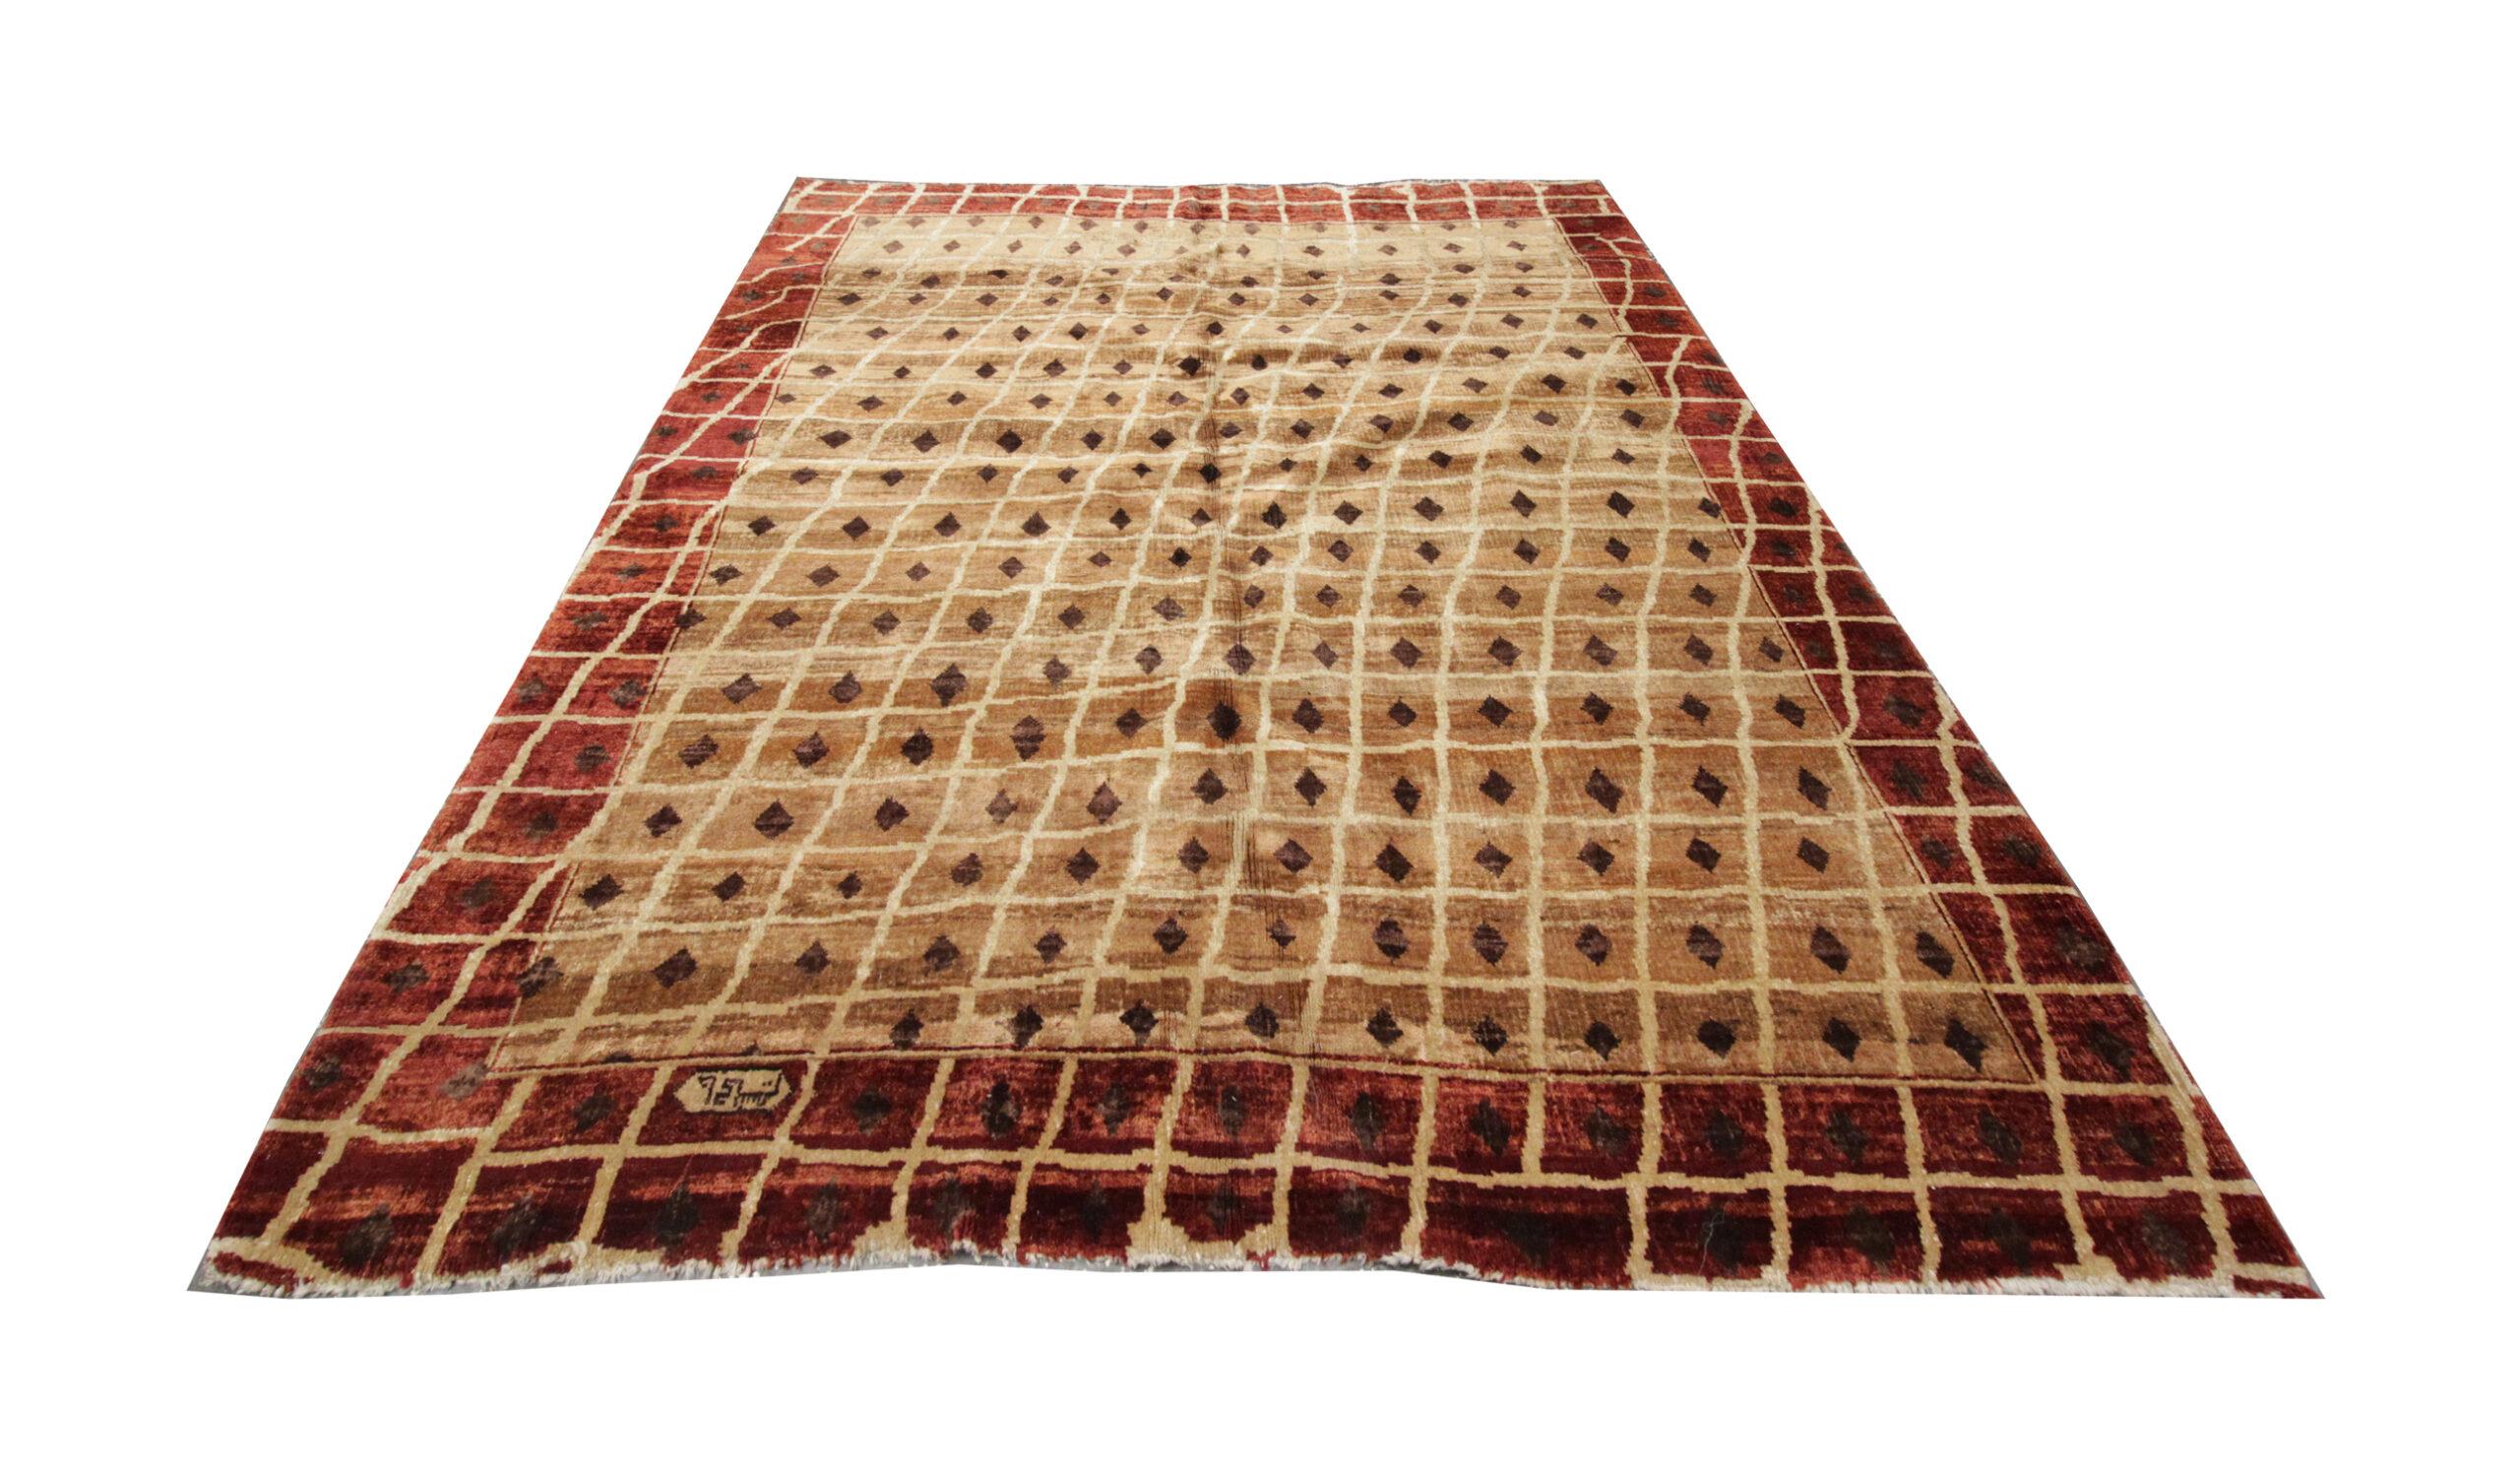 This simple yet grand area rug has been hand-woven with Beige and orange tones. The simple design shows a gridded linear pattern with diamond motifs central to each square. On the border, this pattern continues on a burnt orange background. Unique